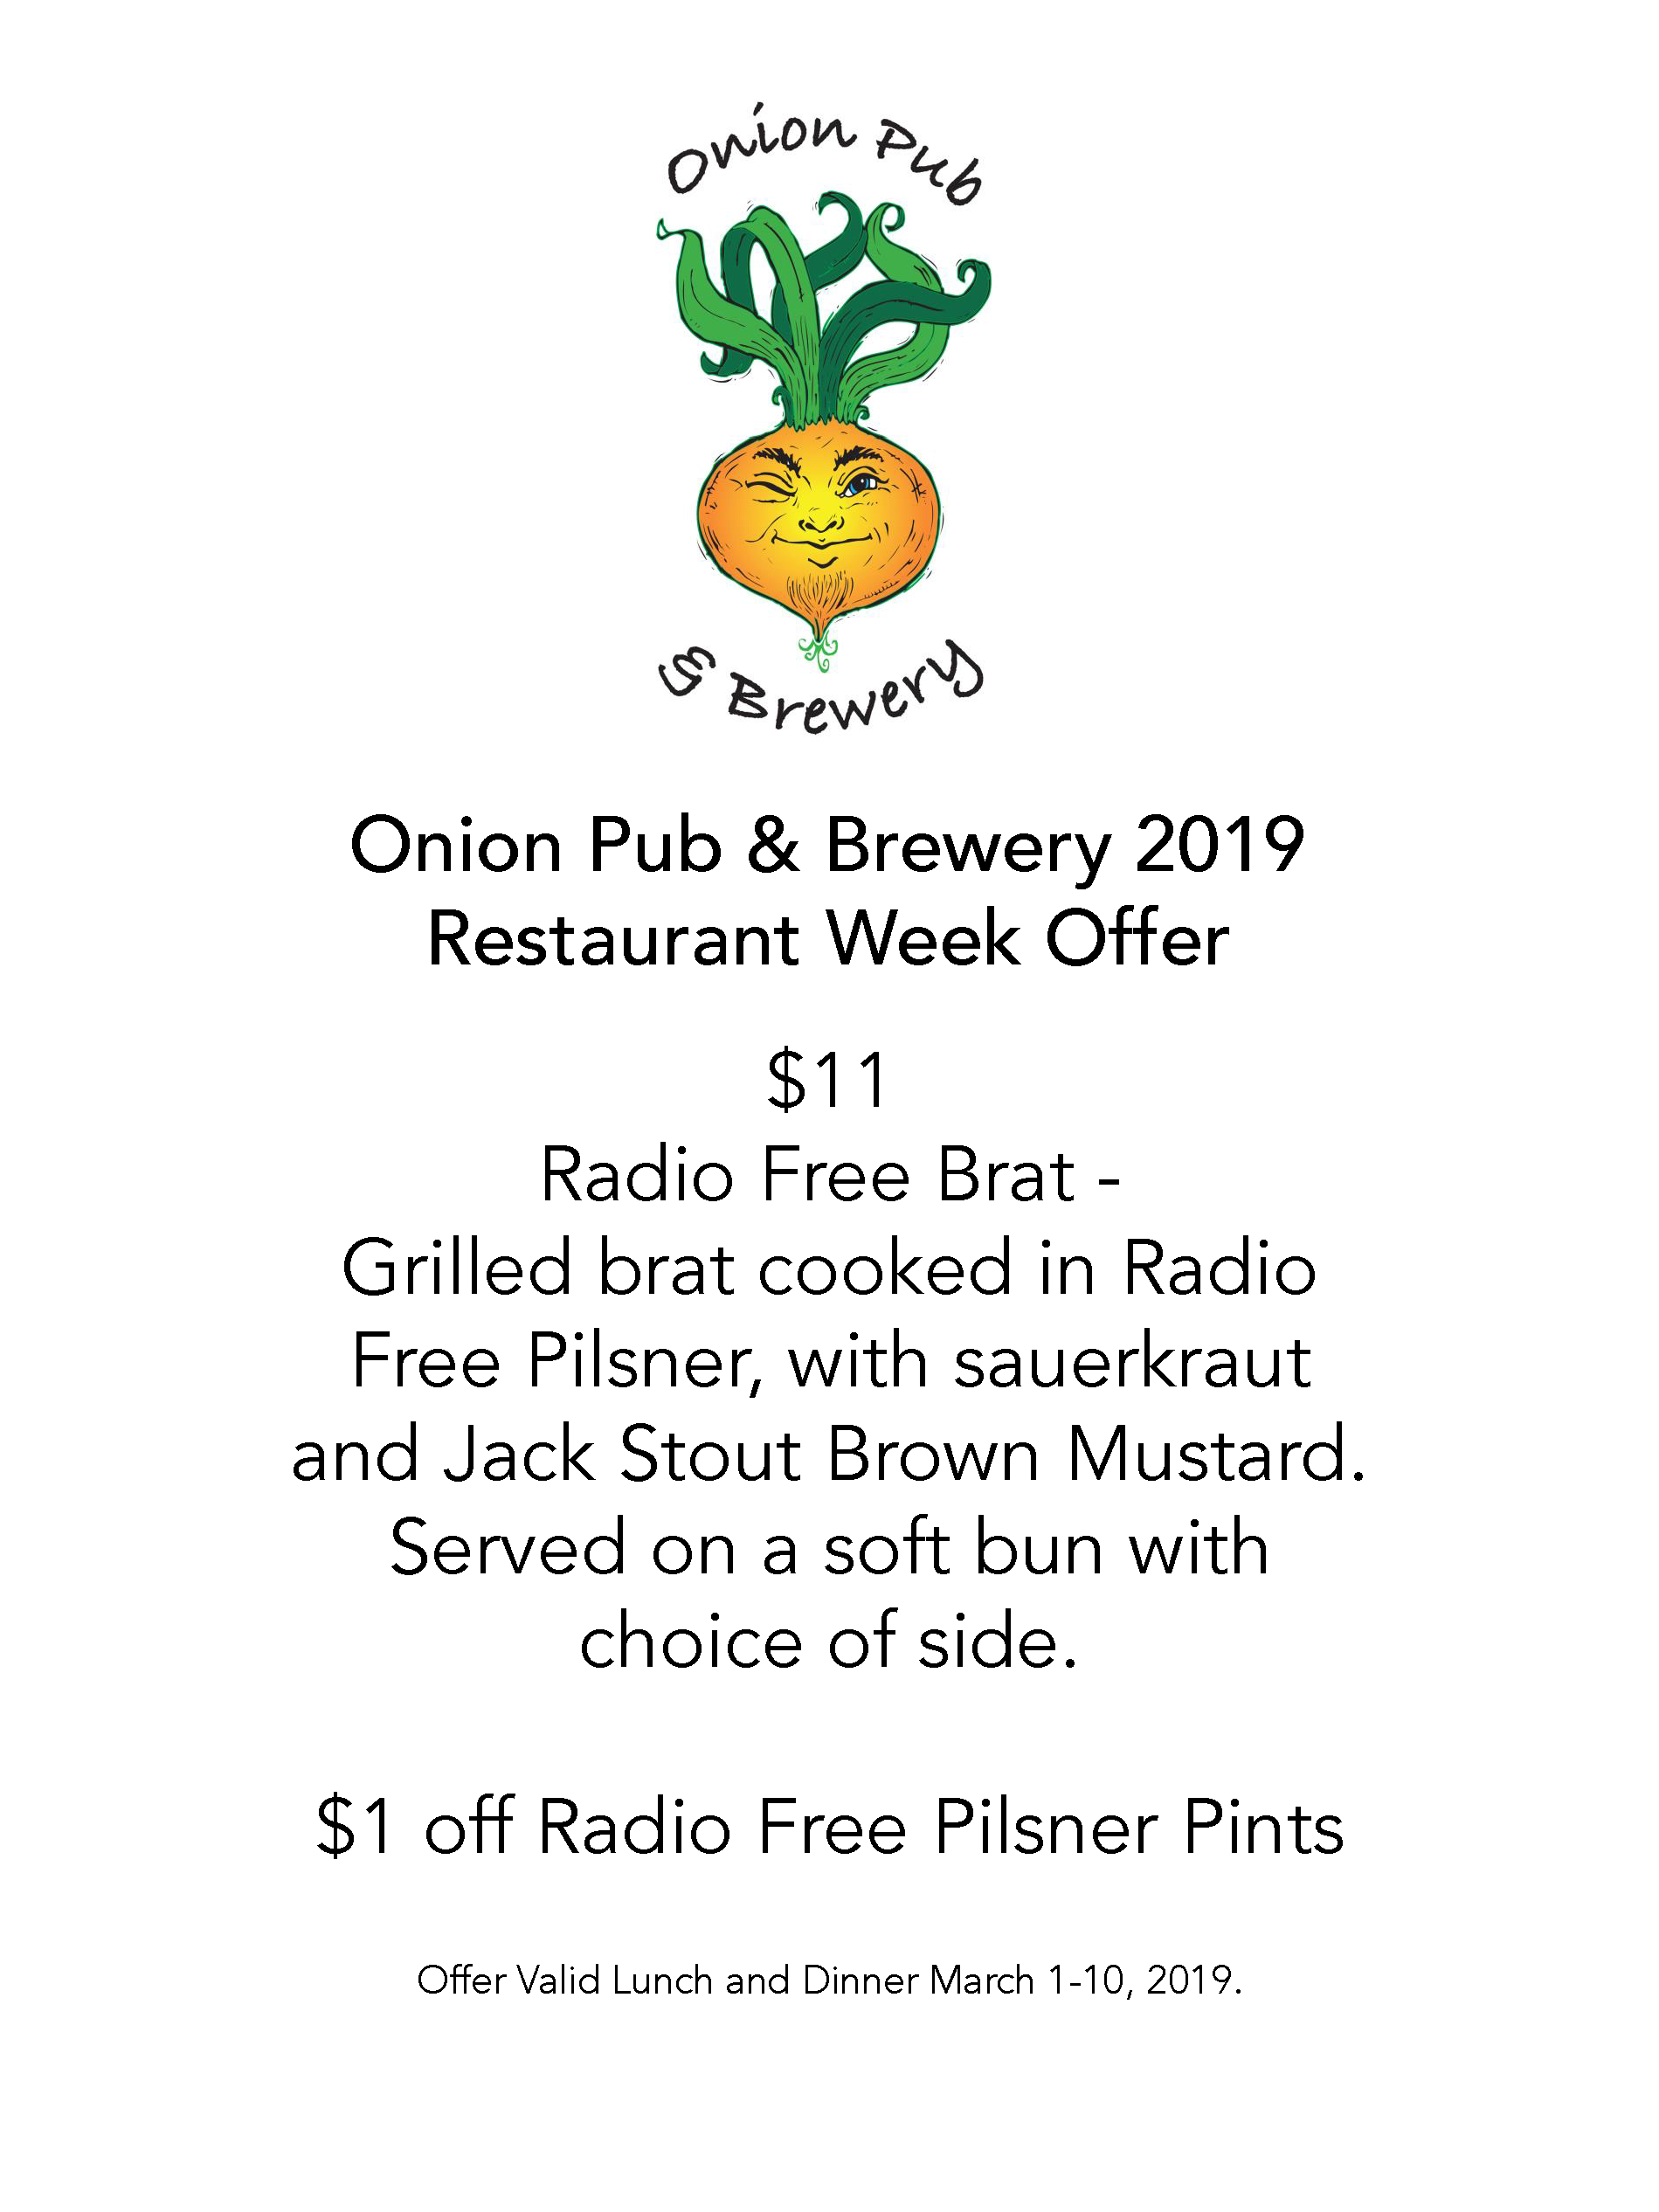 The Onion Pub Offer